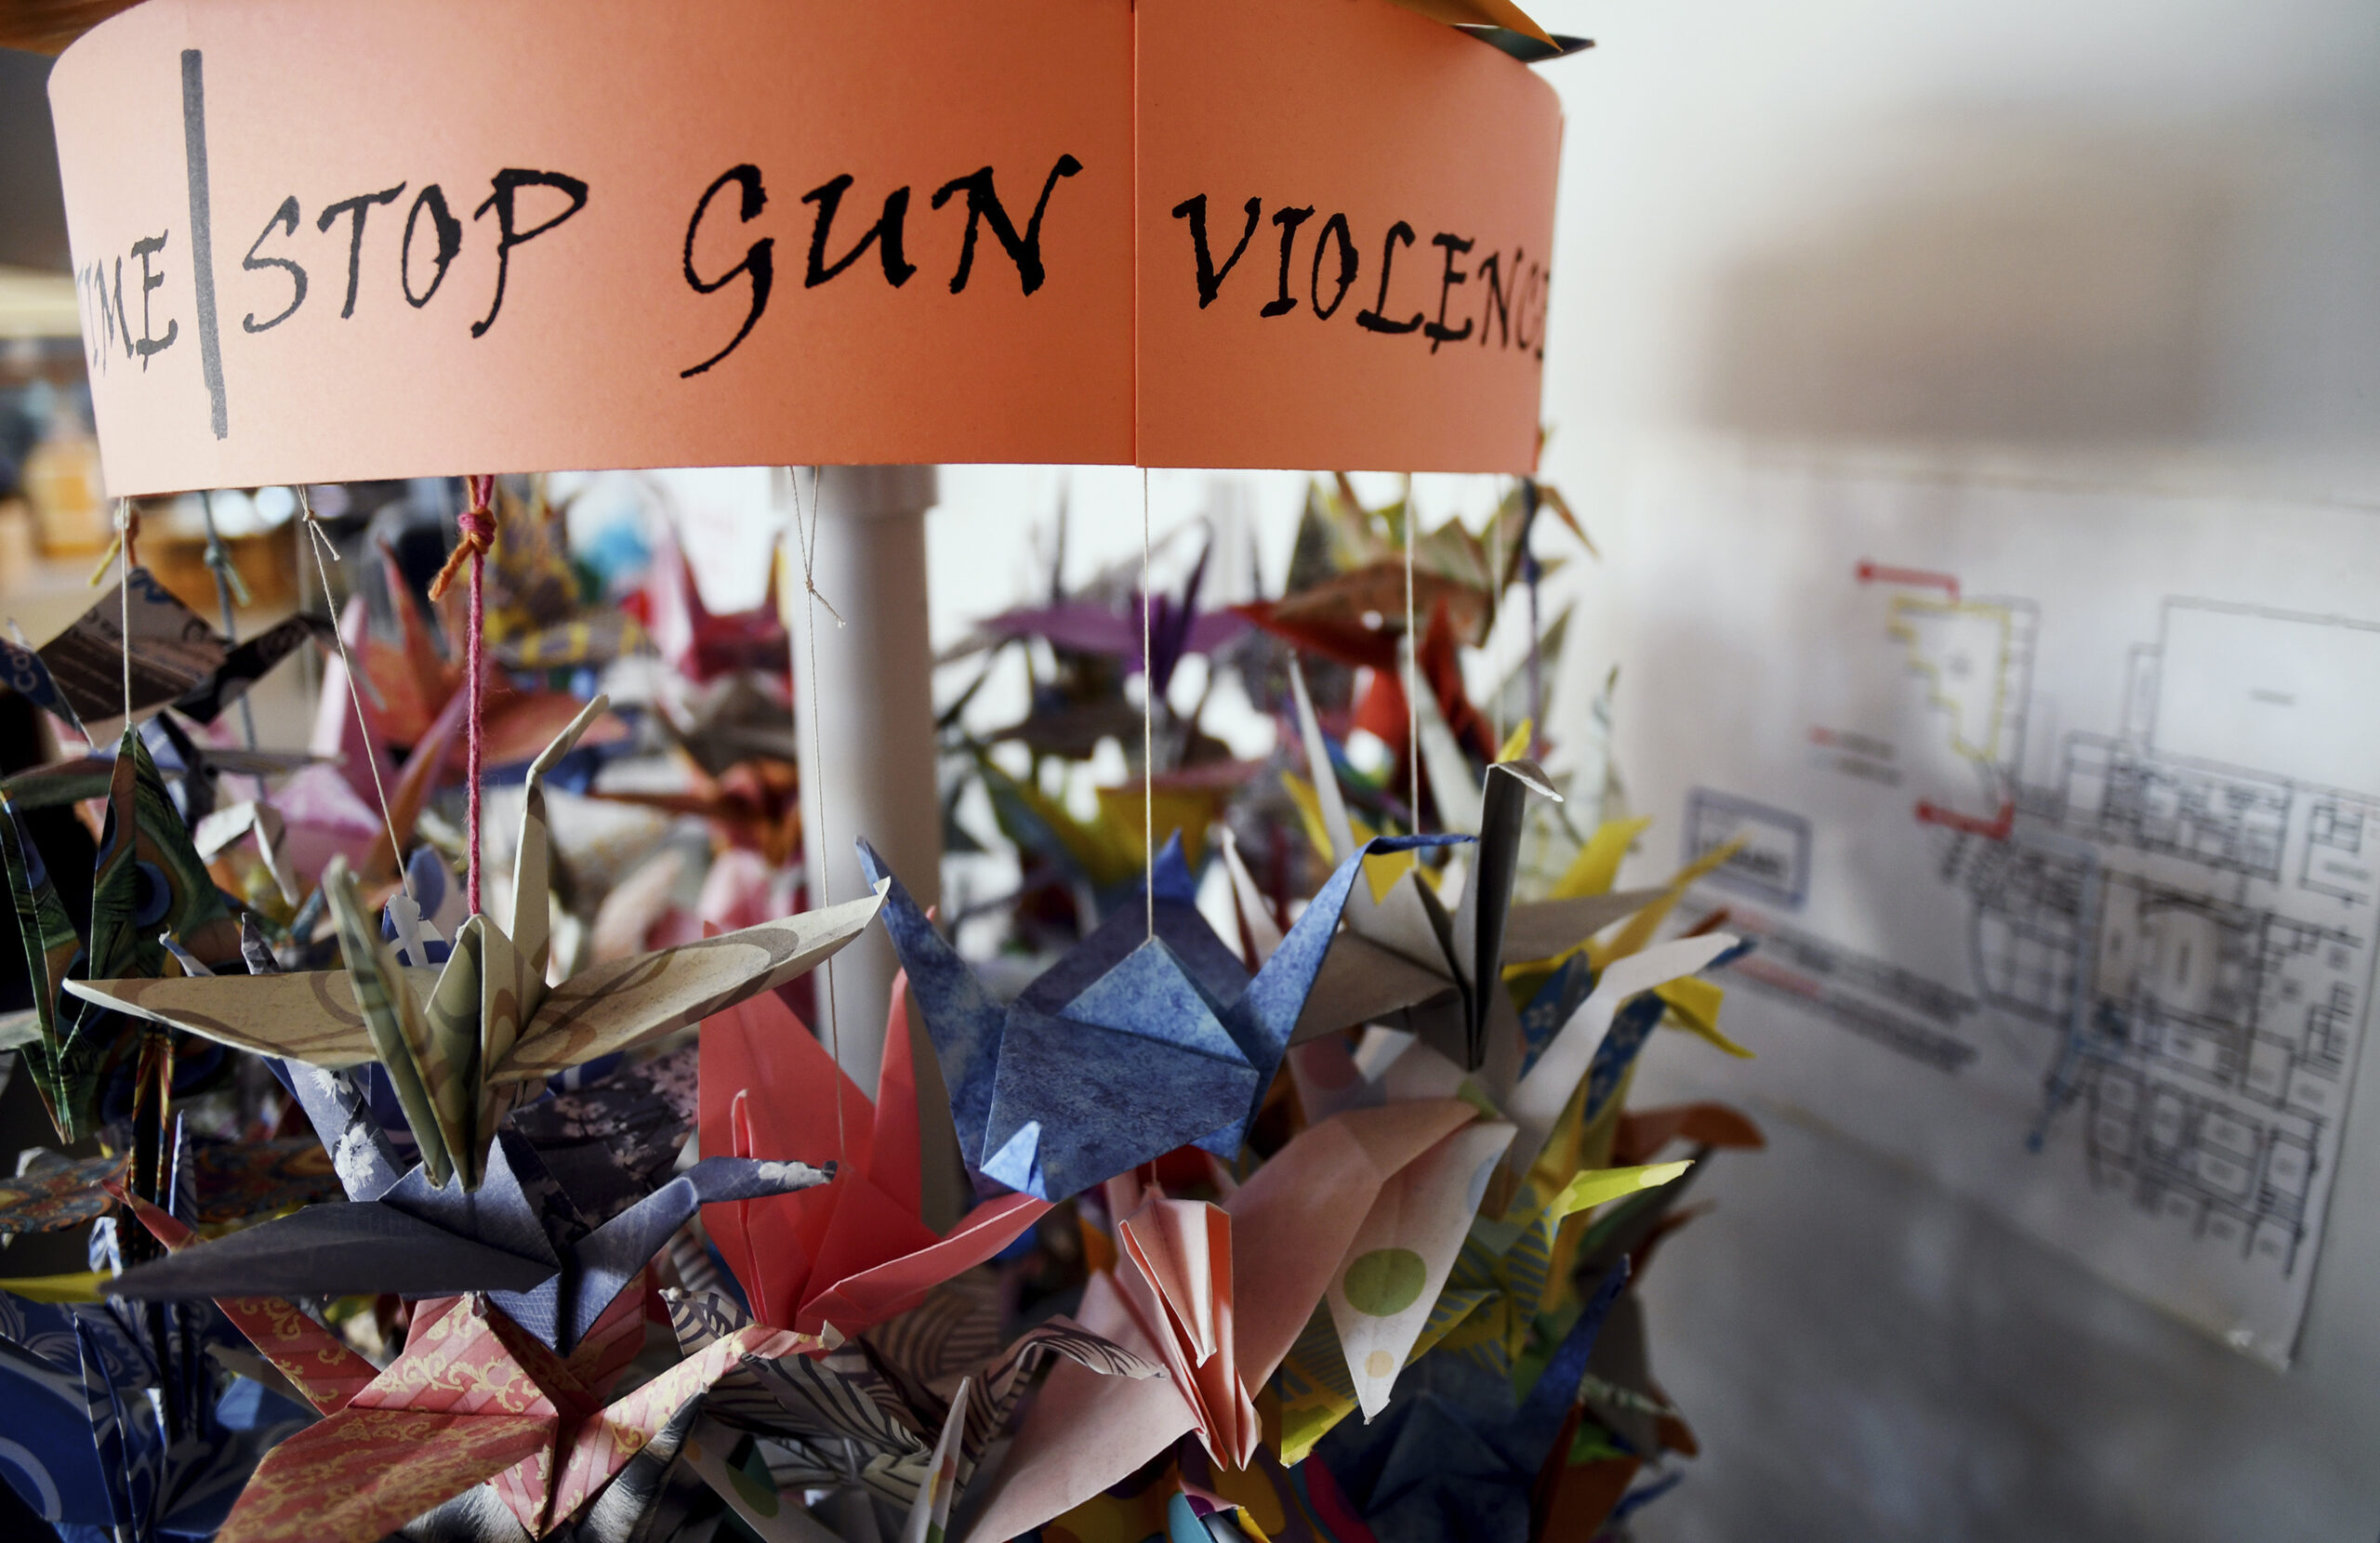 In this March 23, 2019, file photo, origami cranes, a symbol of peace, hang in the Columbine High School library in Littleton, Colo., near where several survivors and family members of the victims gathered to speak about the 20th anniversary of the April